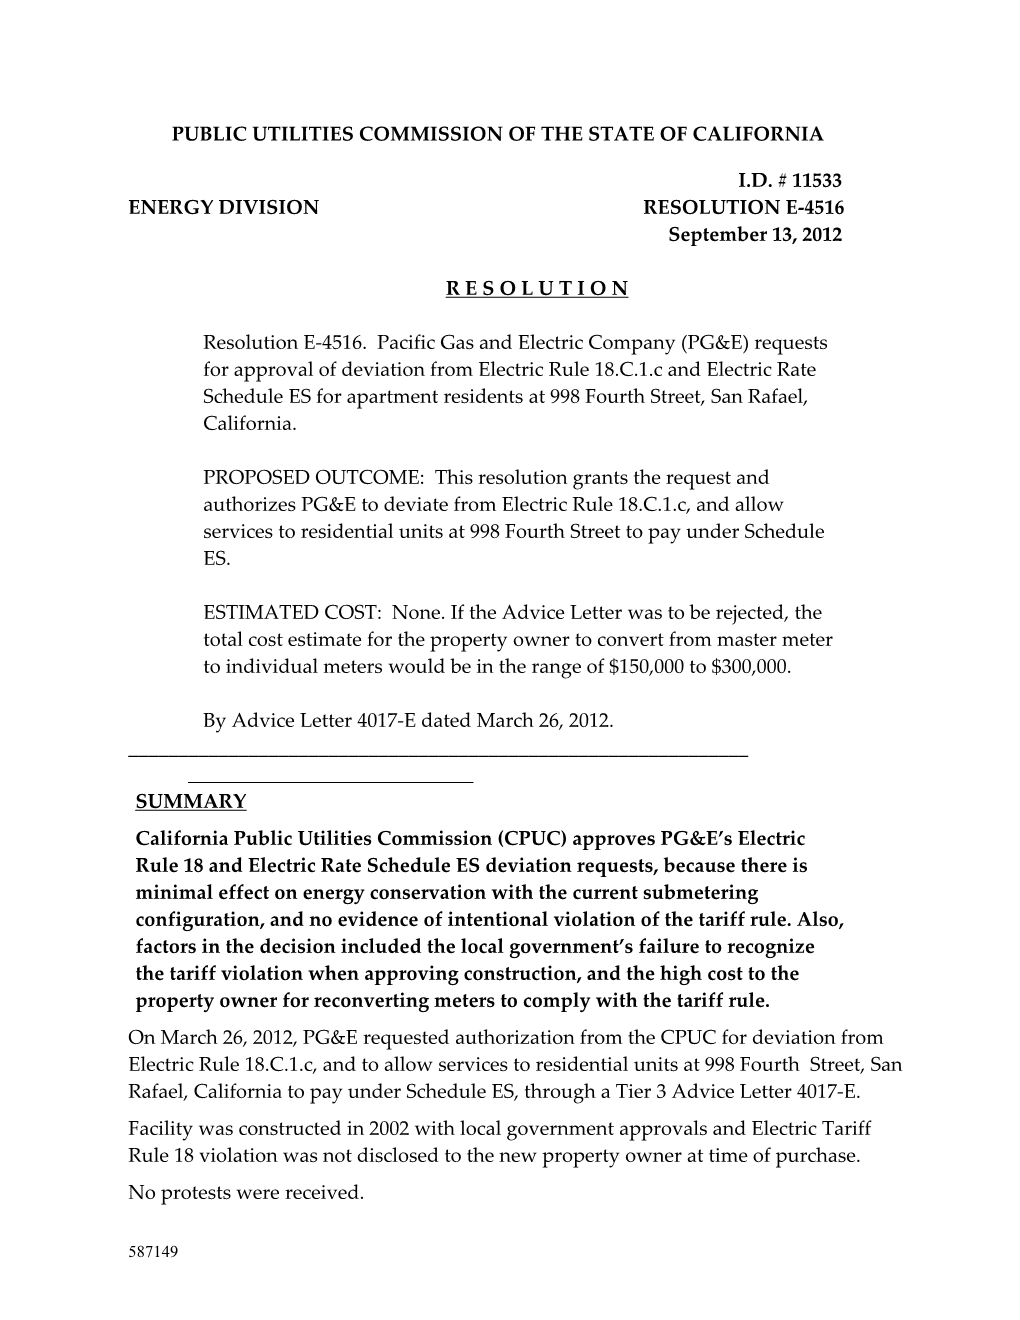 Public Utilities Commission of the State of California s79